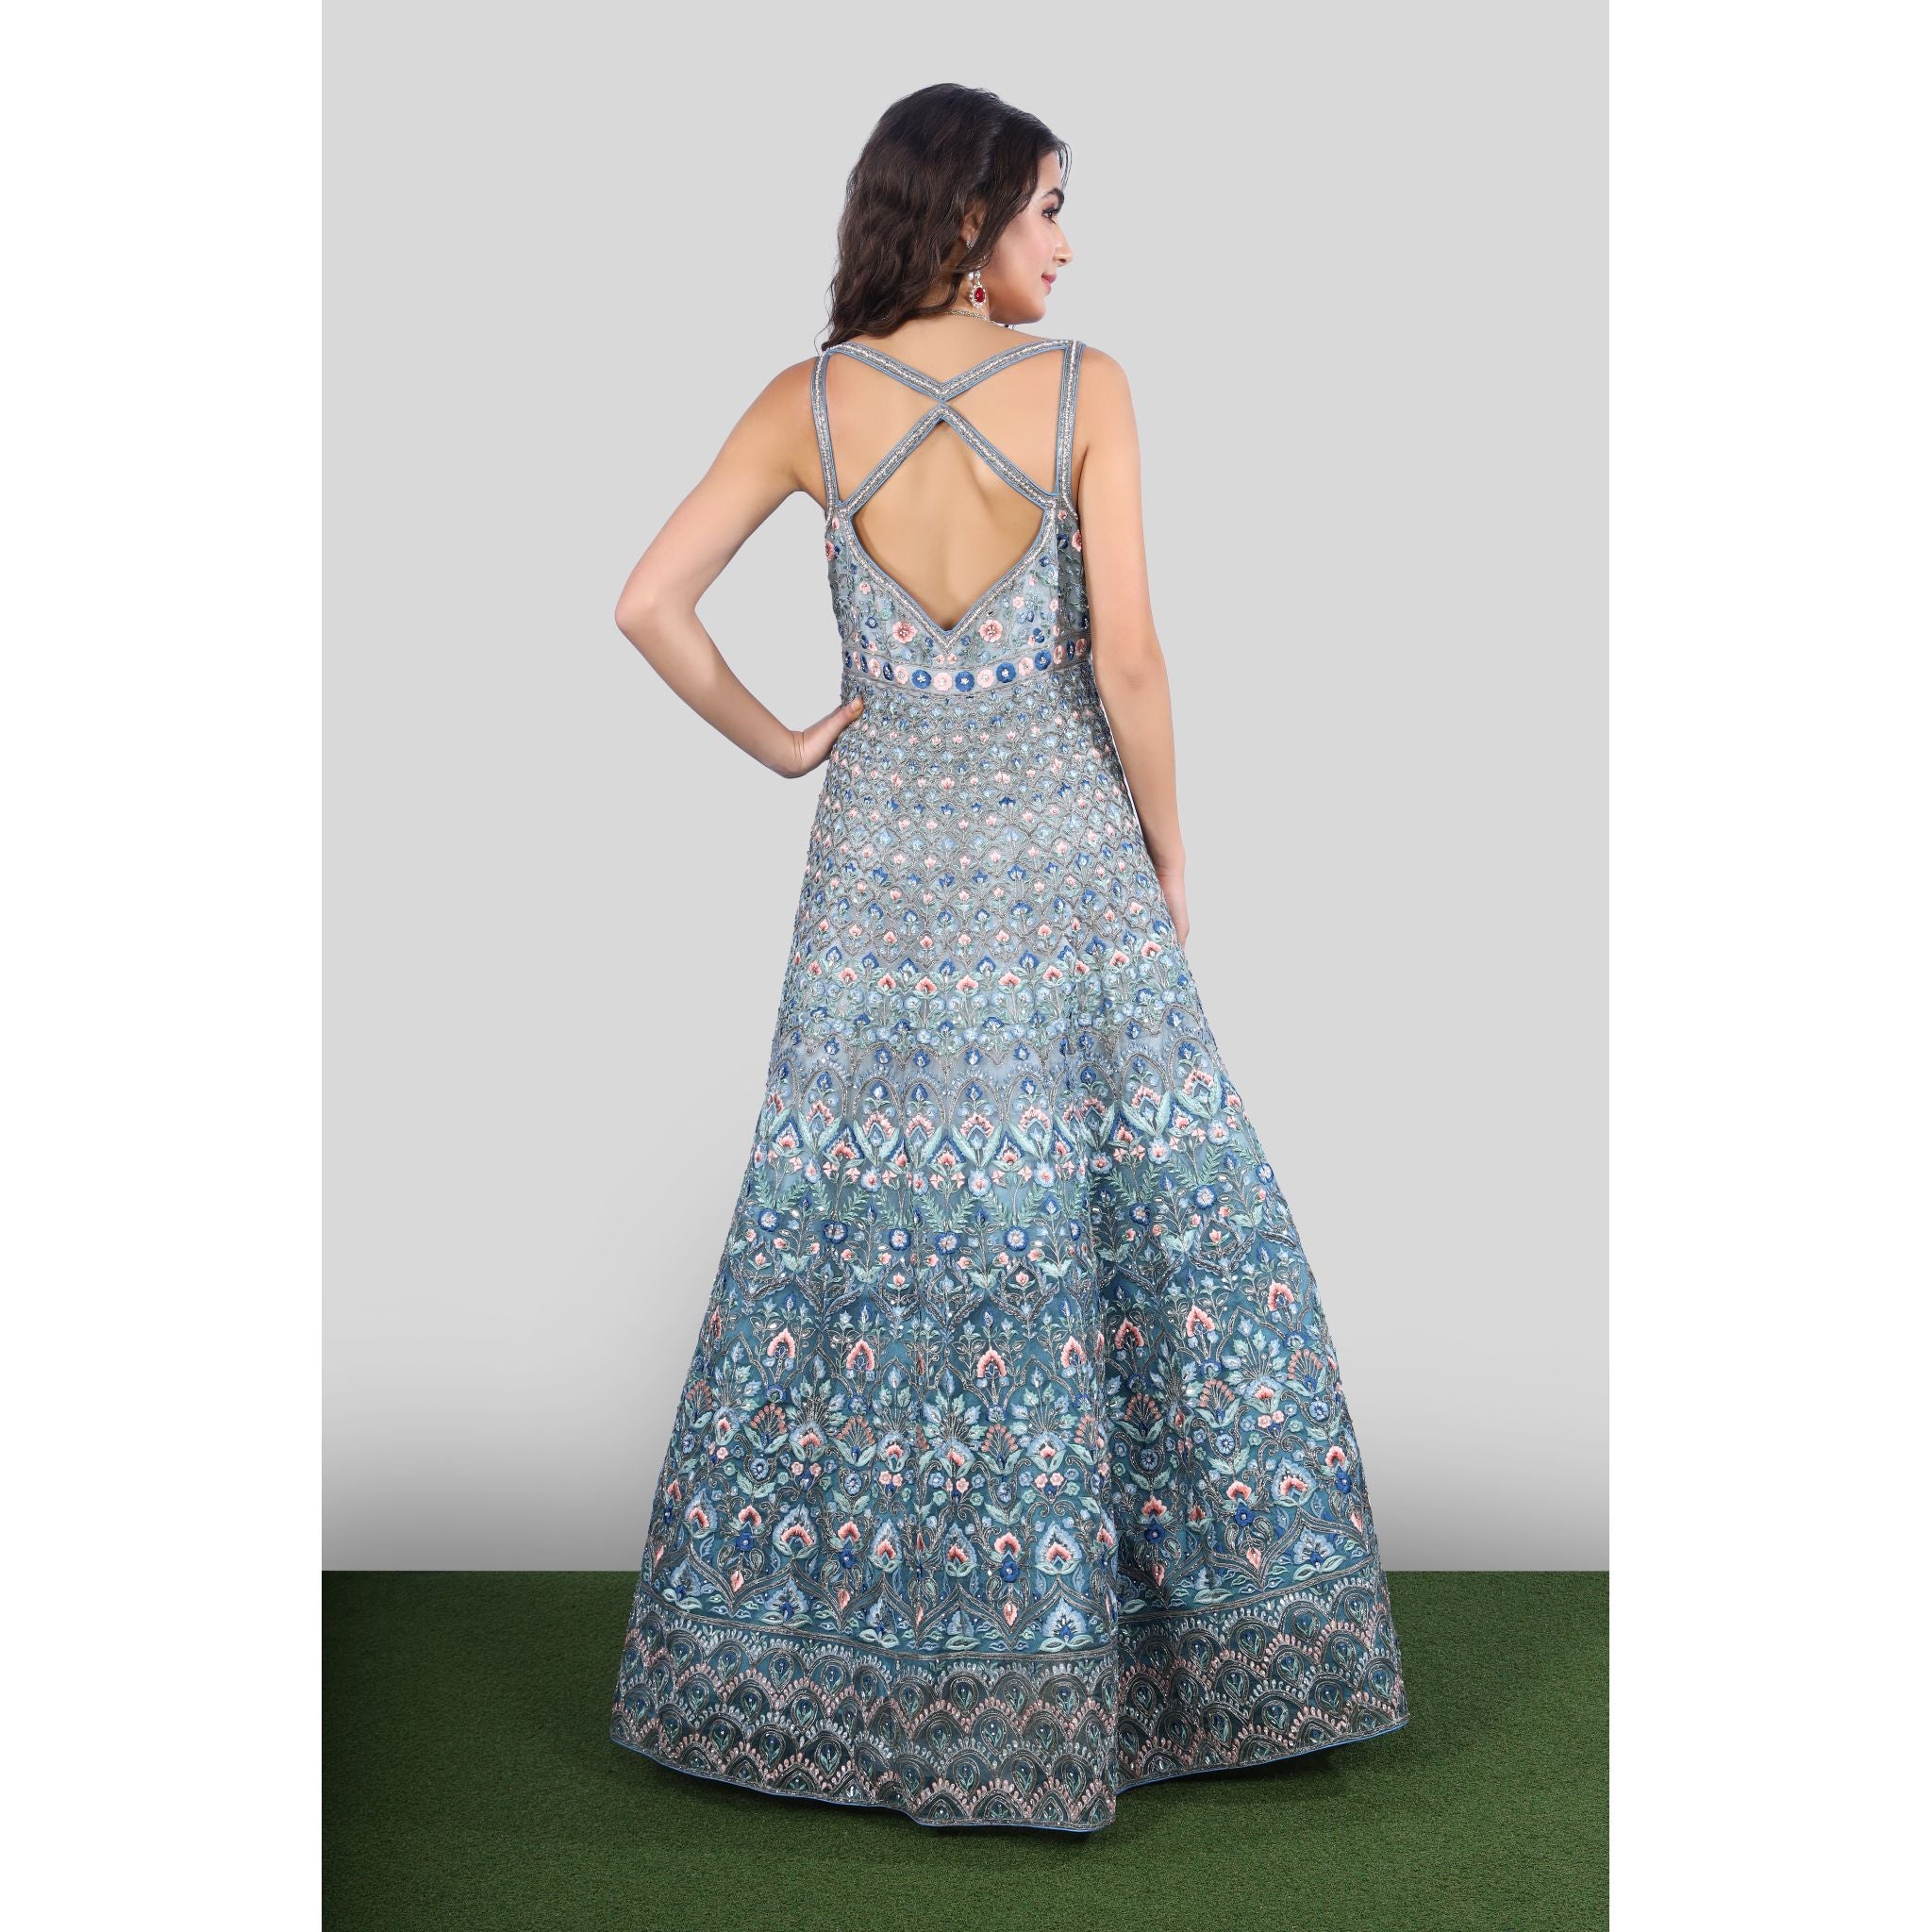 Blue Multi-Colored Mughal Floral Gown